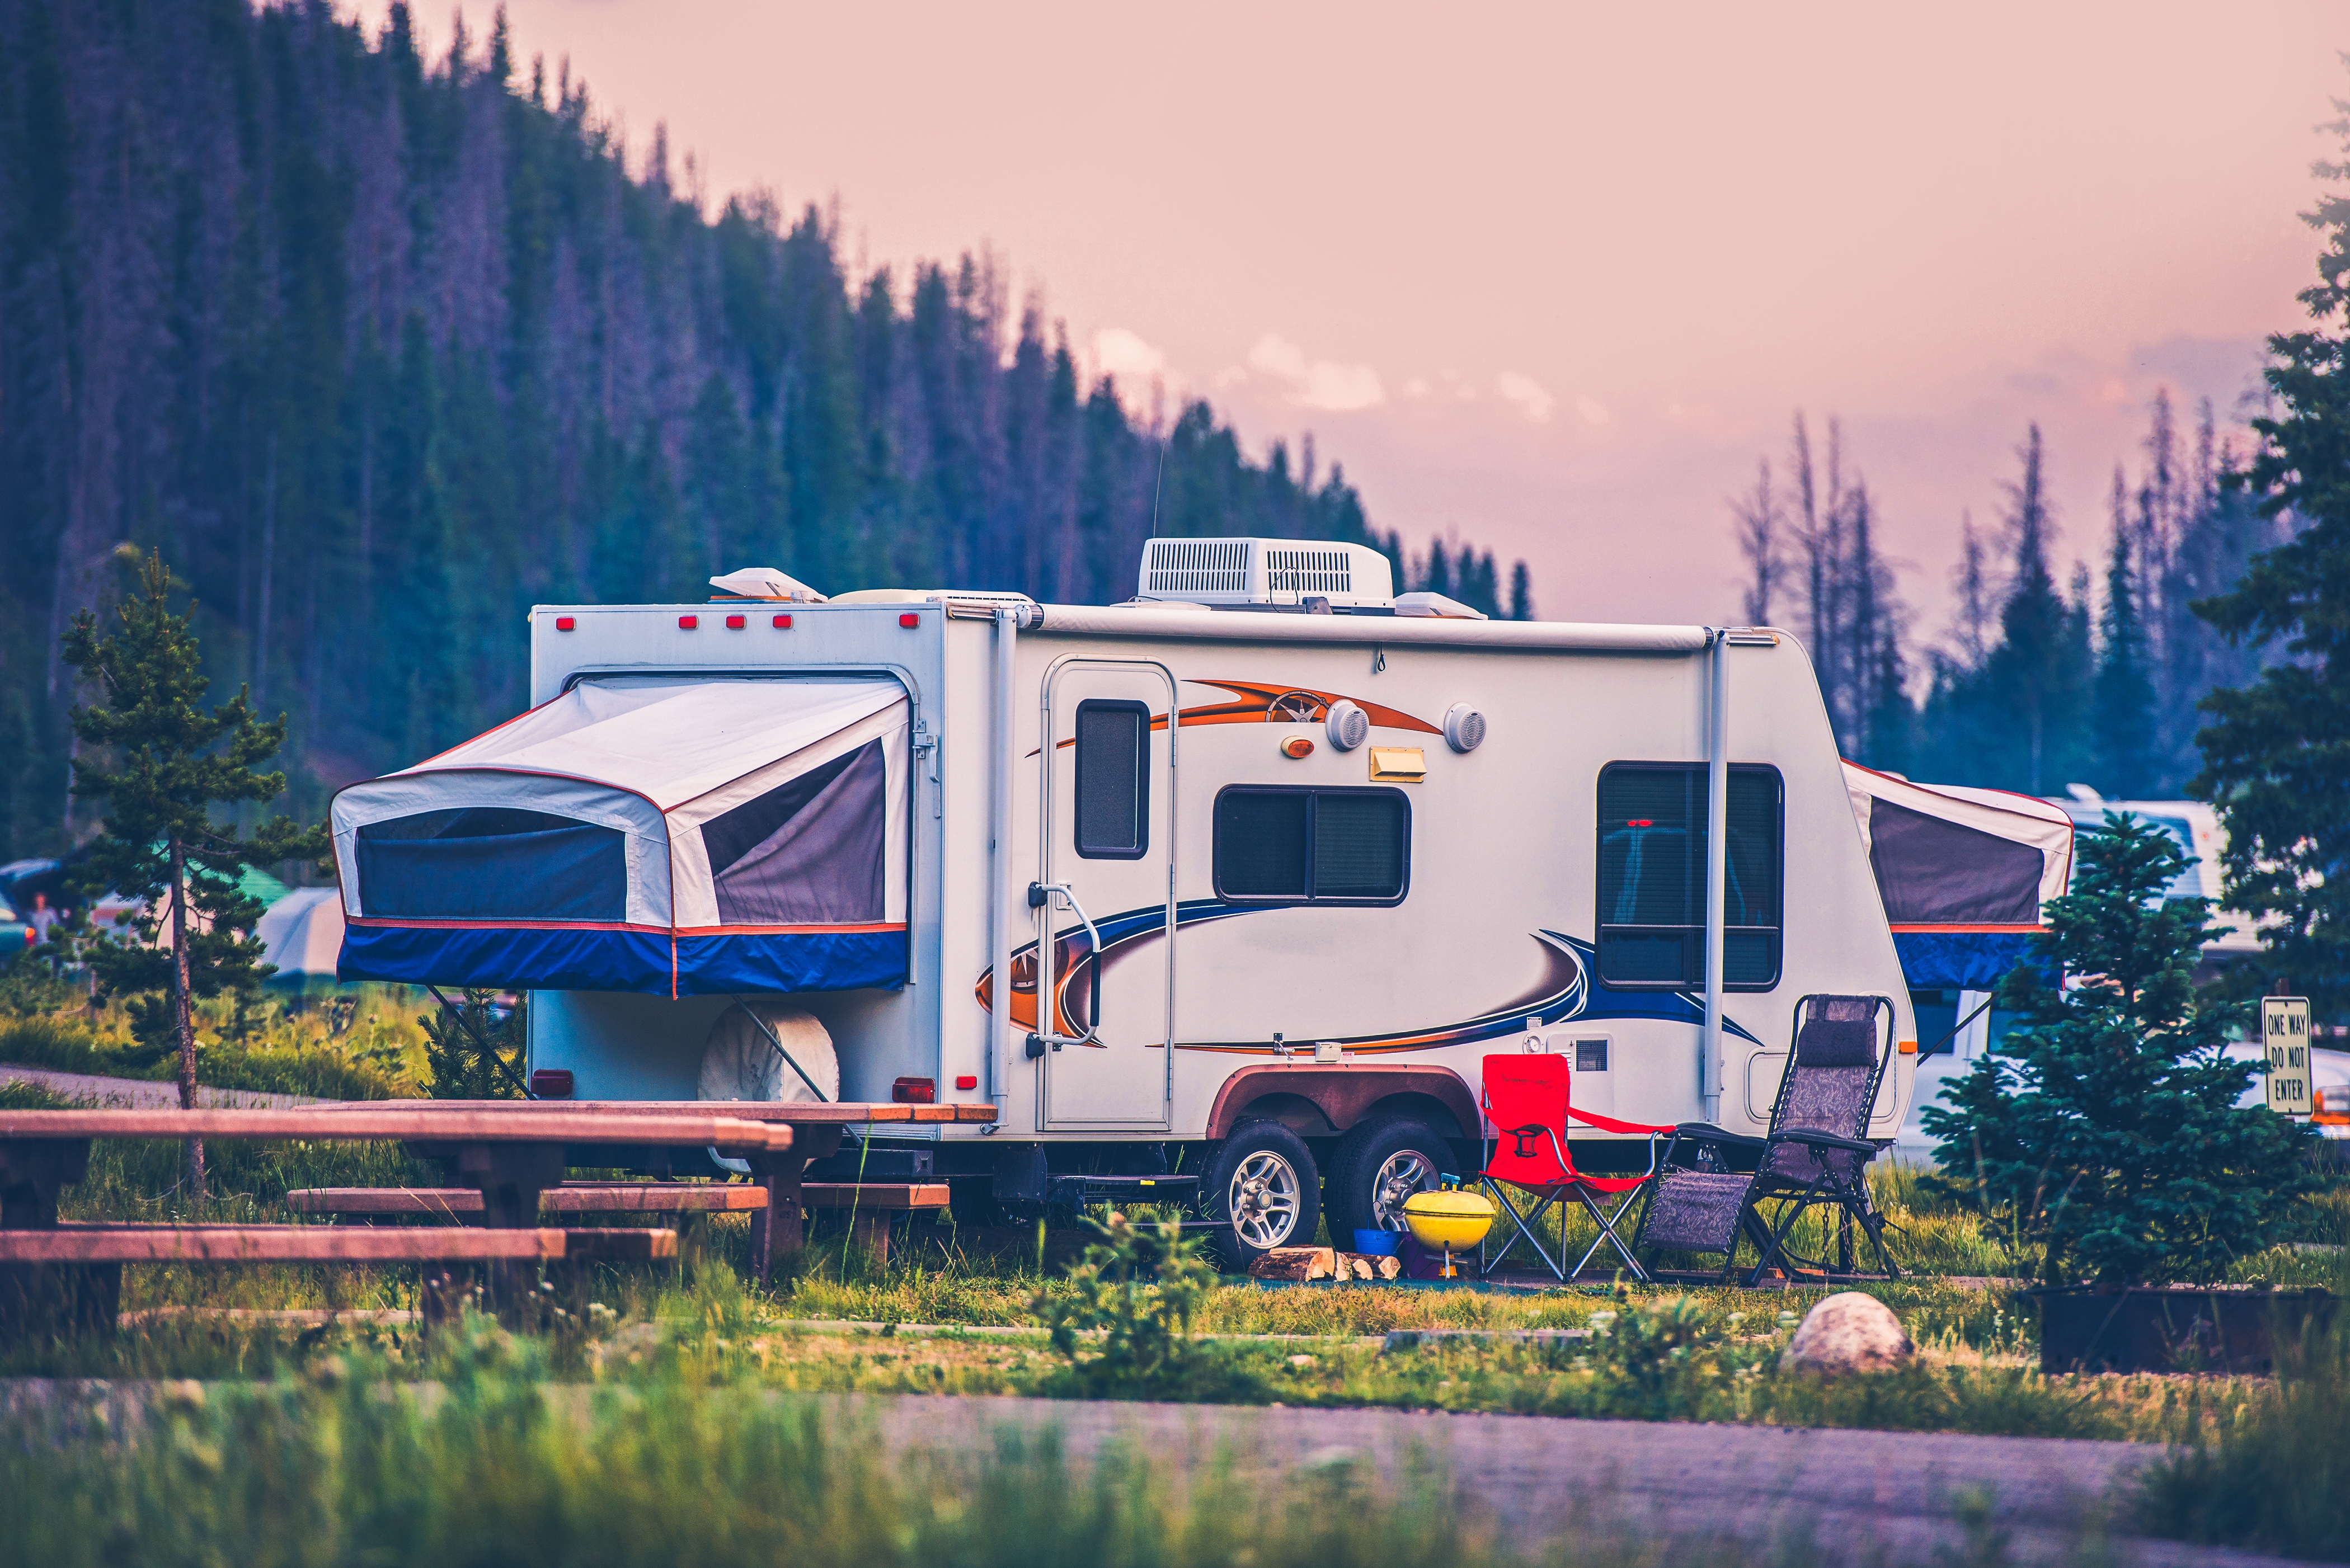 10 Tips for Finding Good RV Campgrounds